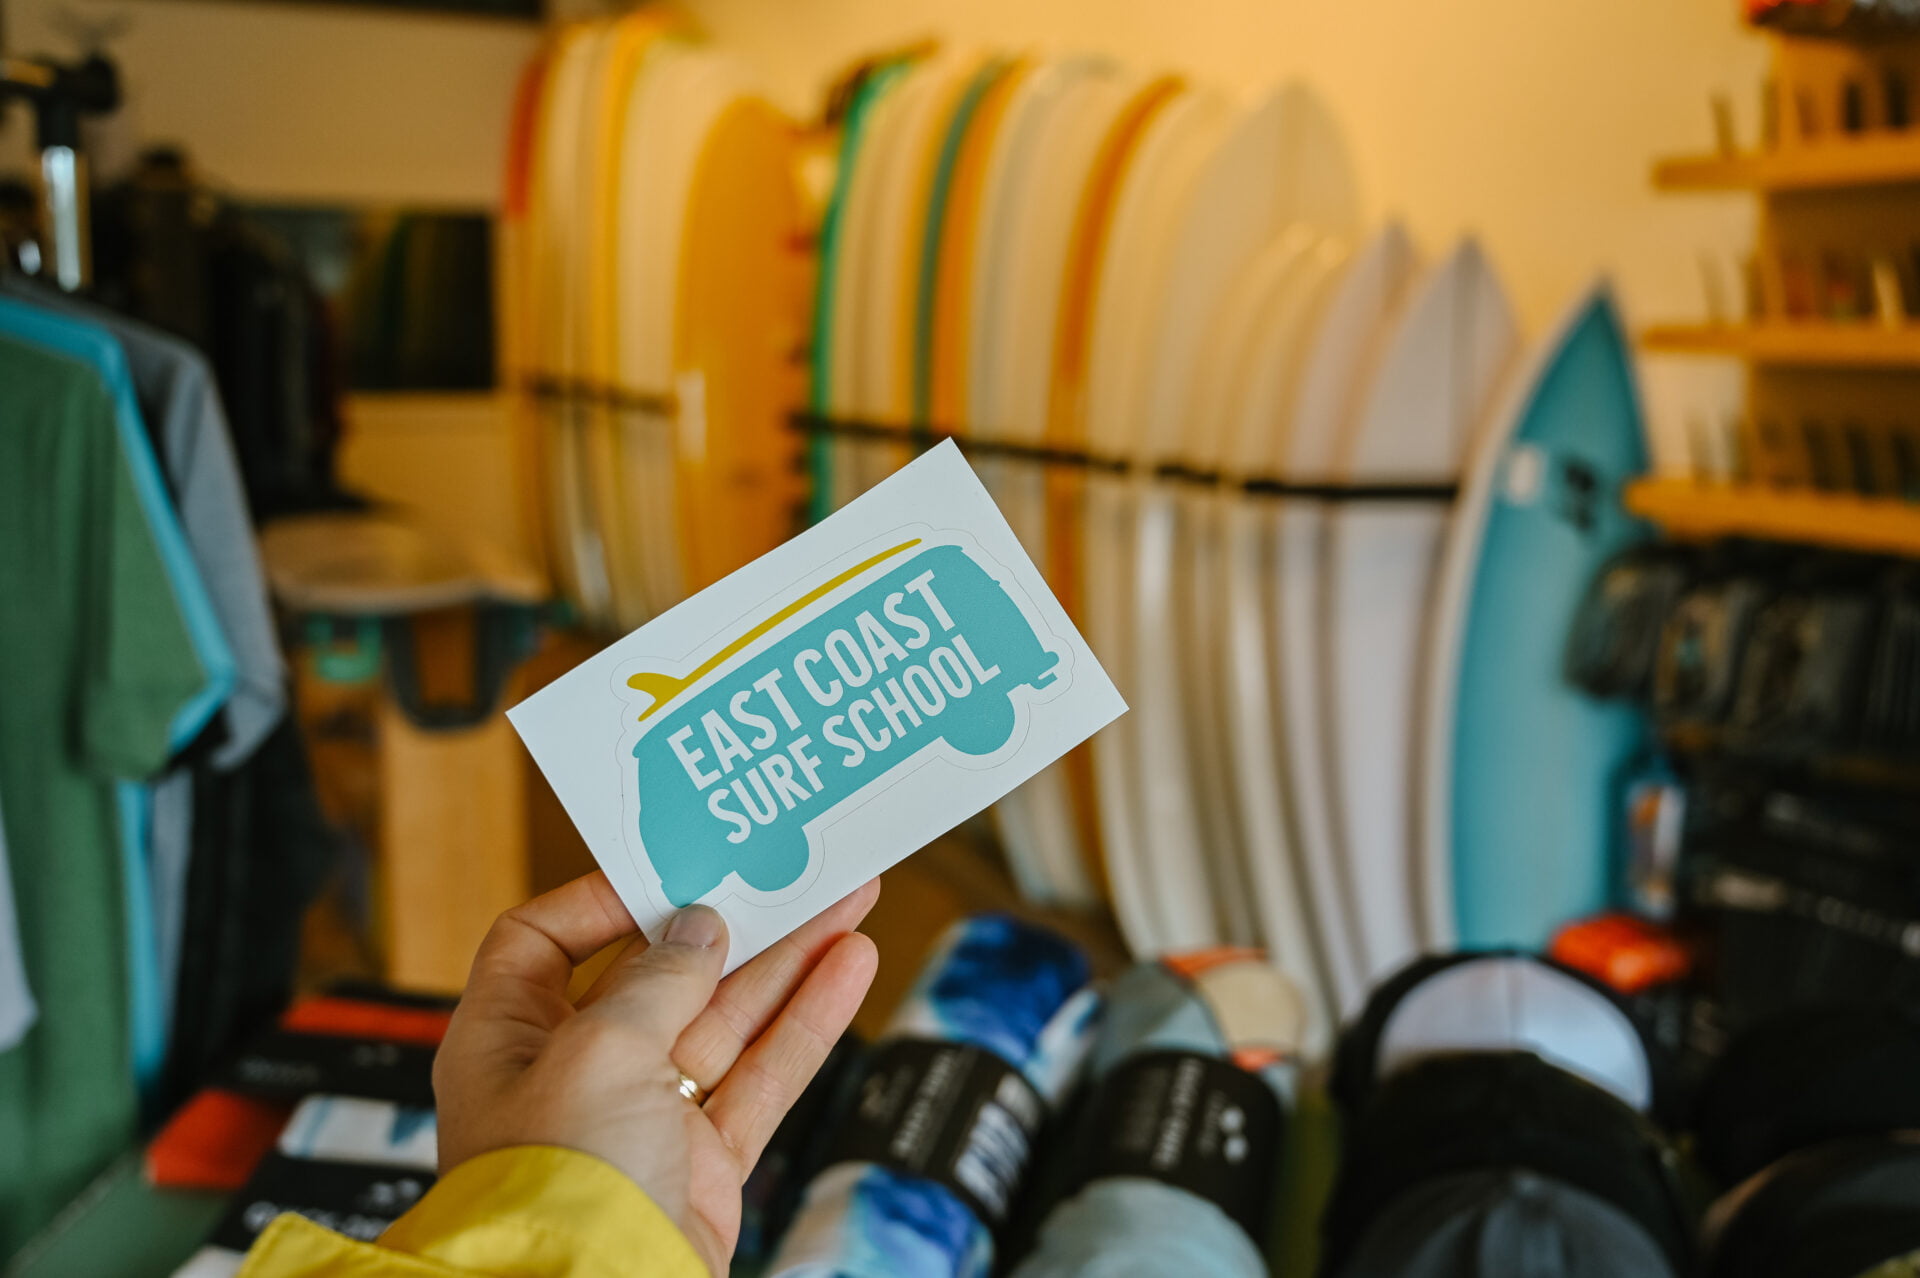 hand holding a east coast surf school sticker, surf boards in the background